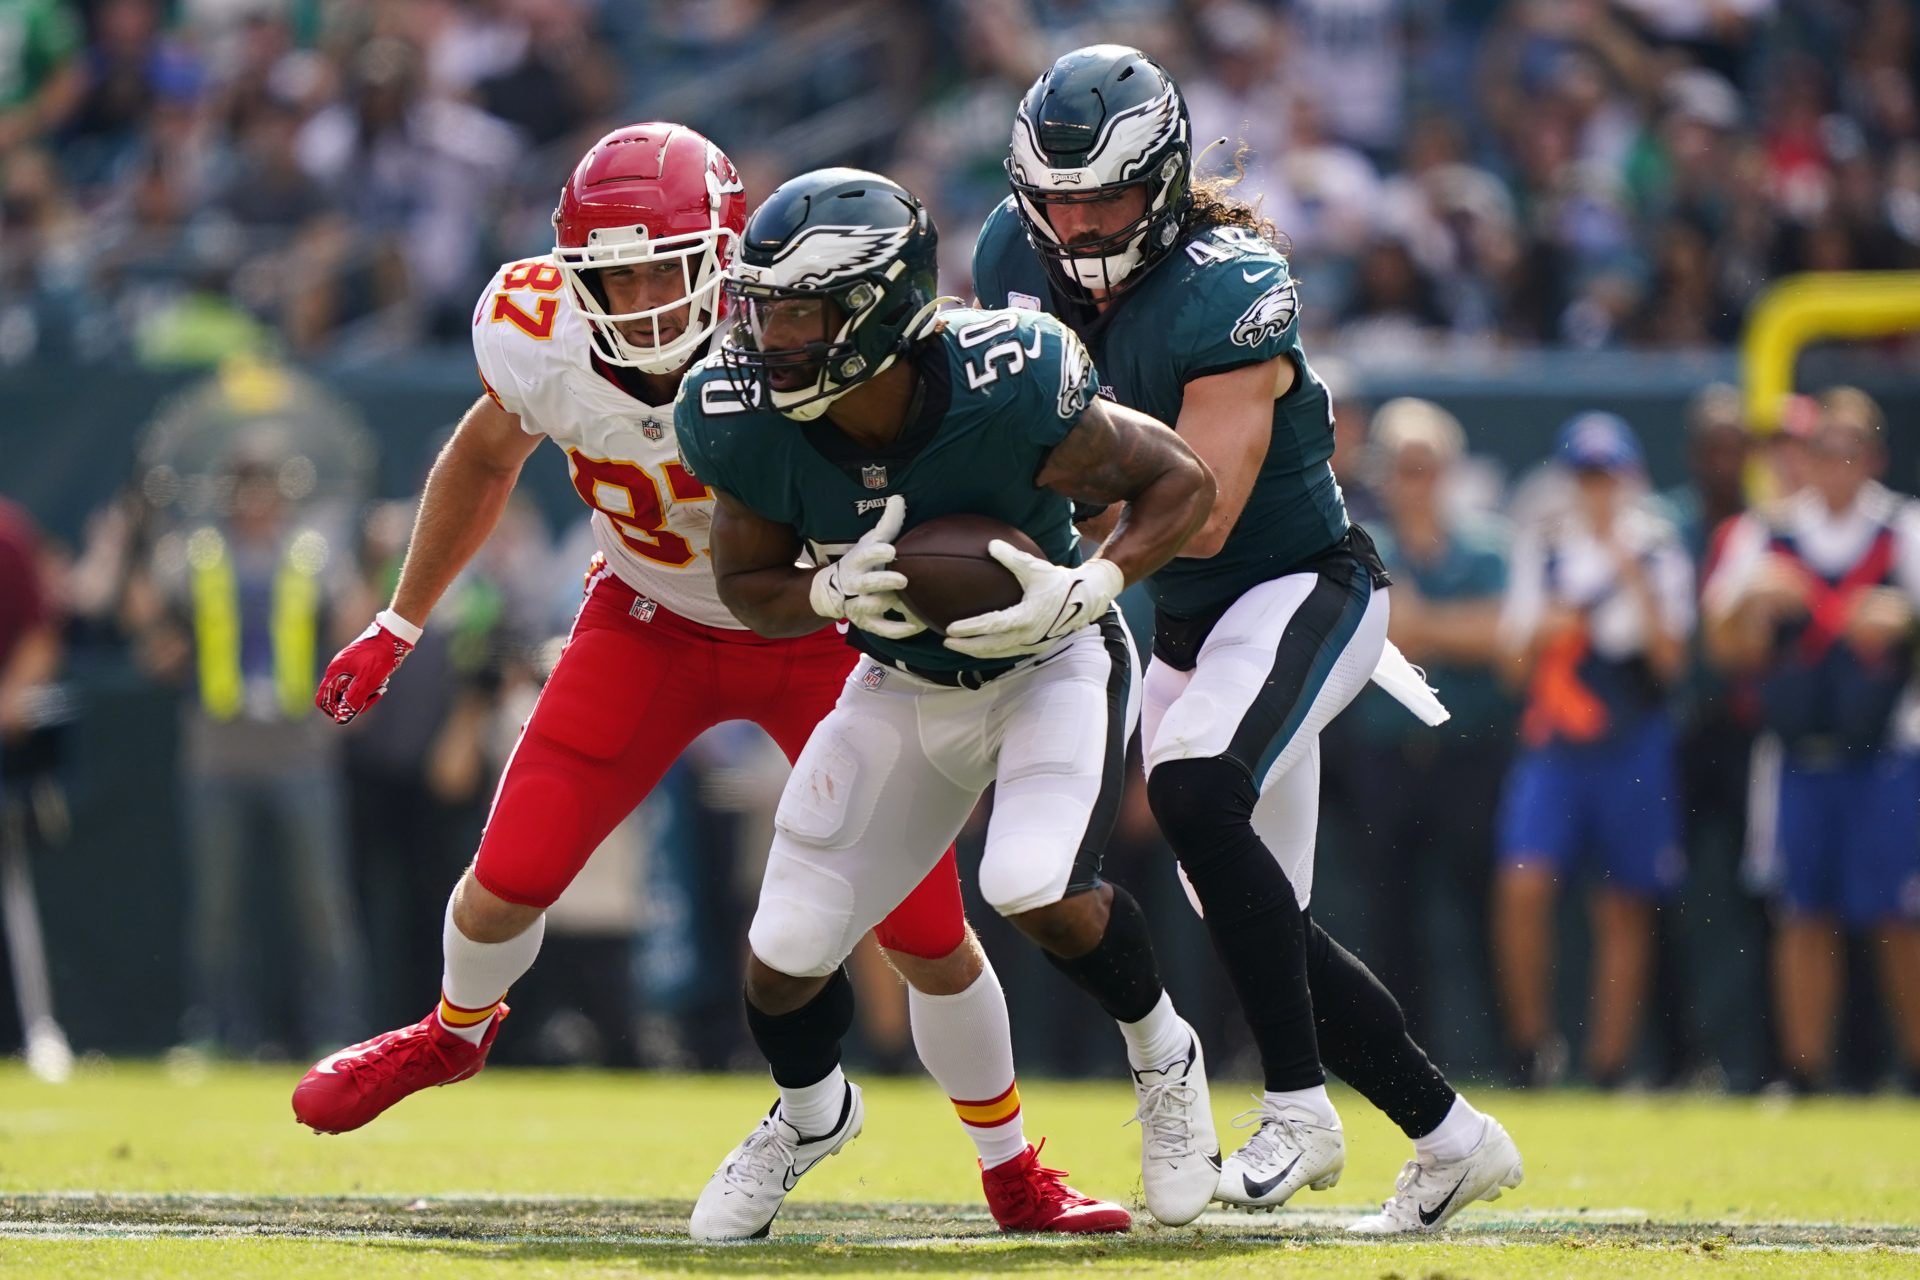 Philadelphia Eagles linebacker Eric Wilson (50) intercepts the ball in front of Kansas City Chiefs tight end Travis Kelce (87) during the second half of an NFL football game Sunday, Oct. 3, 2021, in Philadelphia.